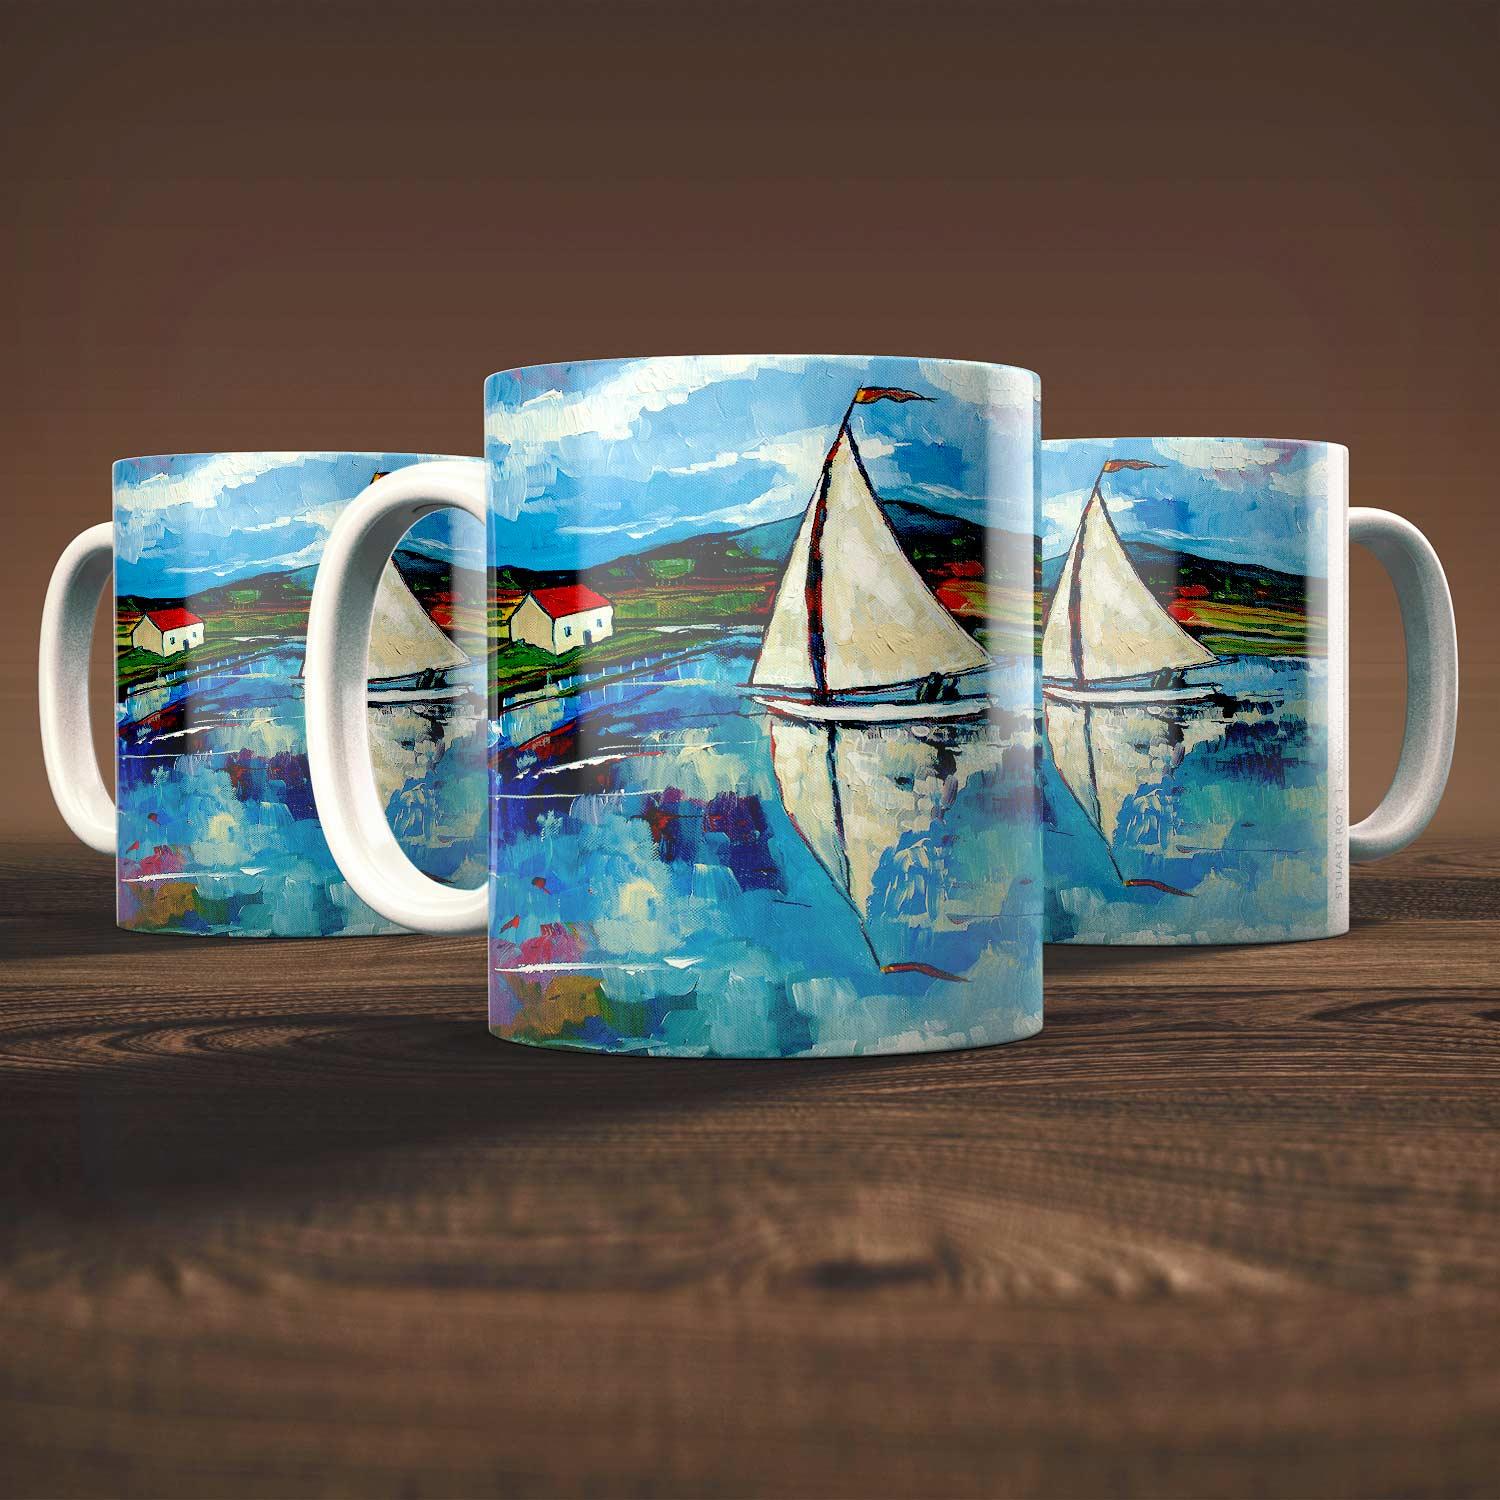 Nearly Home Mug from an original painting by artist Stuart Roy